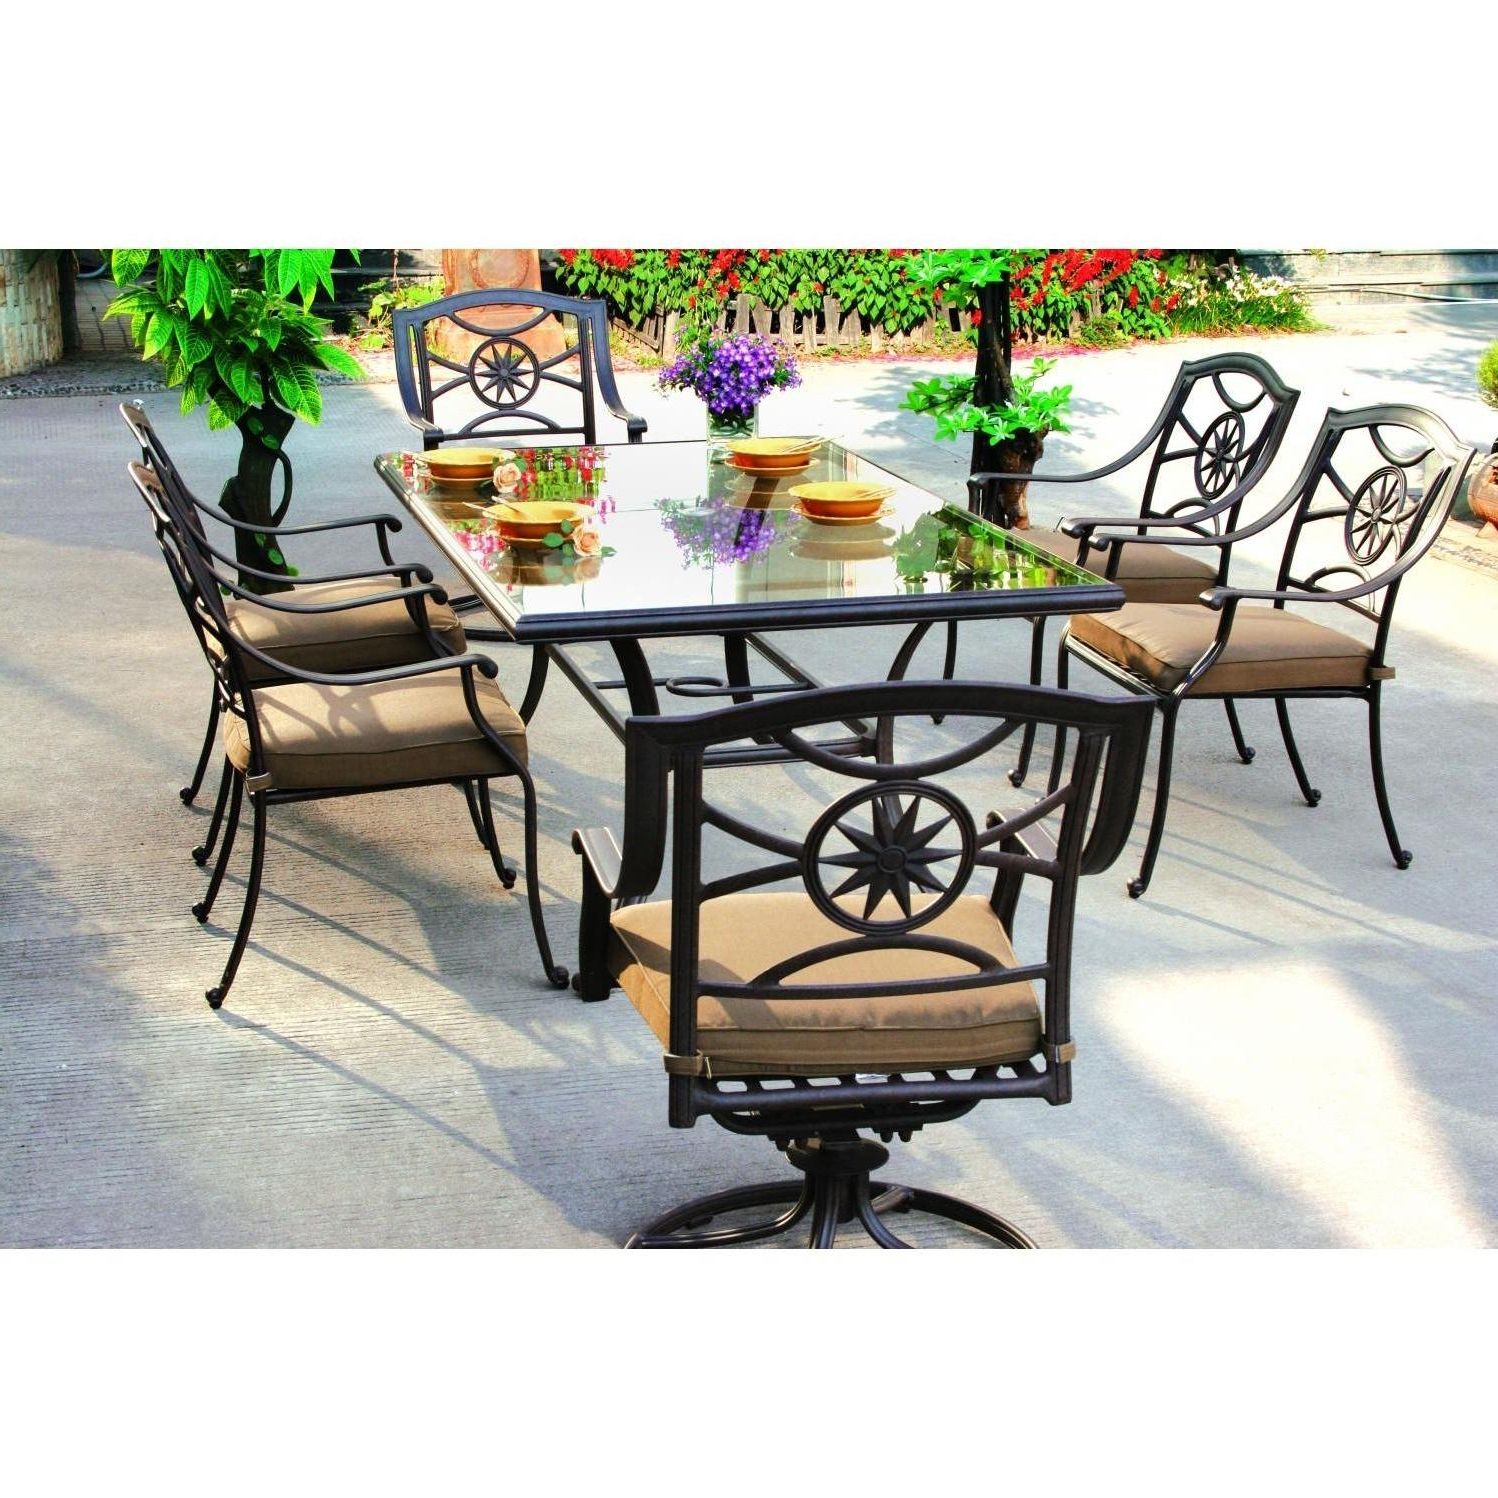 Trendy 7 Piece Patio Dining Sets With Regard To Darlee Ten Star 7 Piece Patio Dining Set, Aluminum, Glass Top (View 15 of 15)